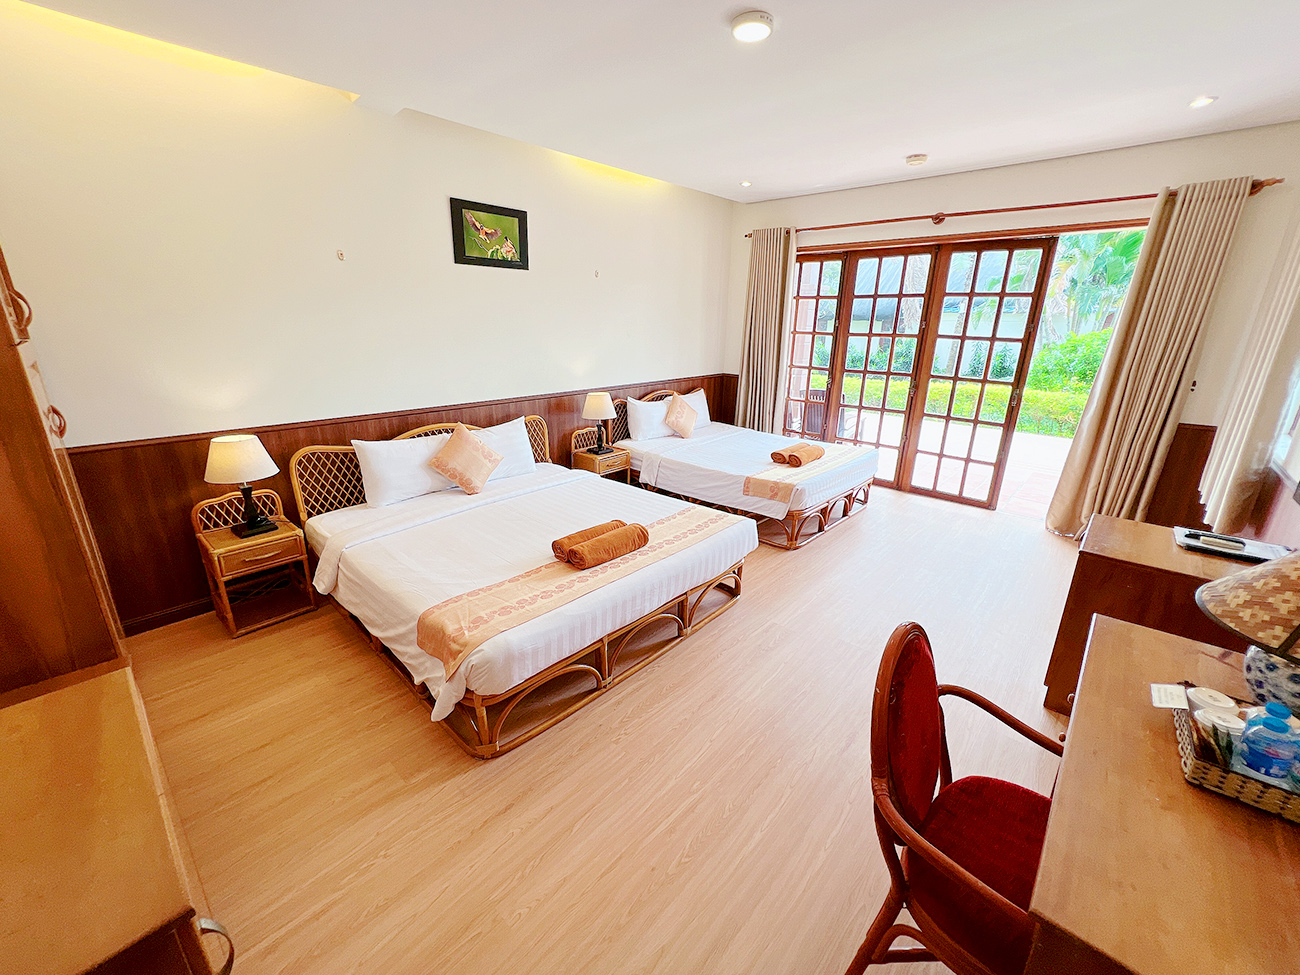 Garden view room with two double beds